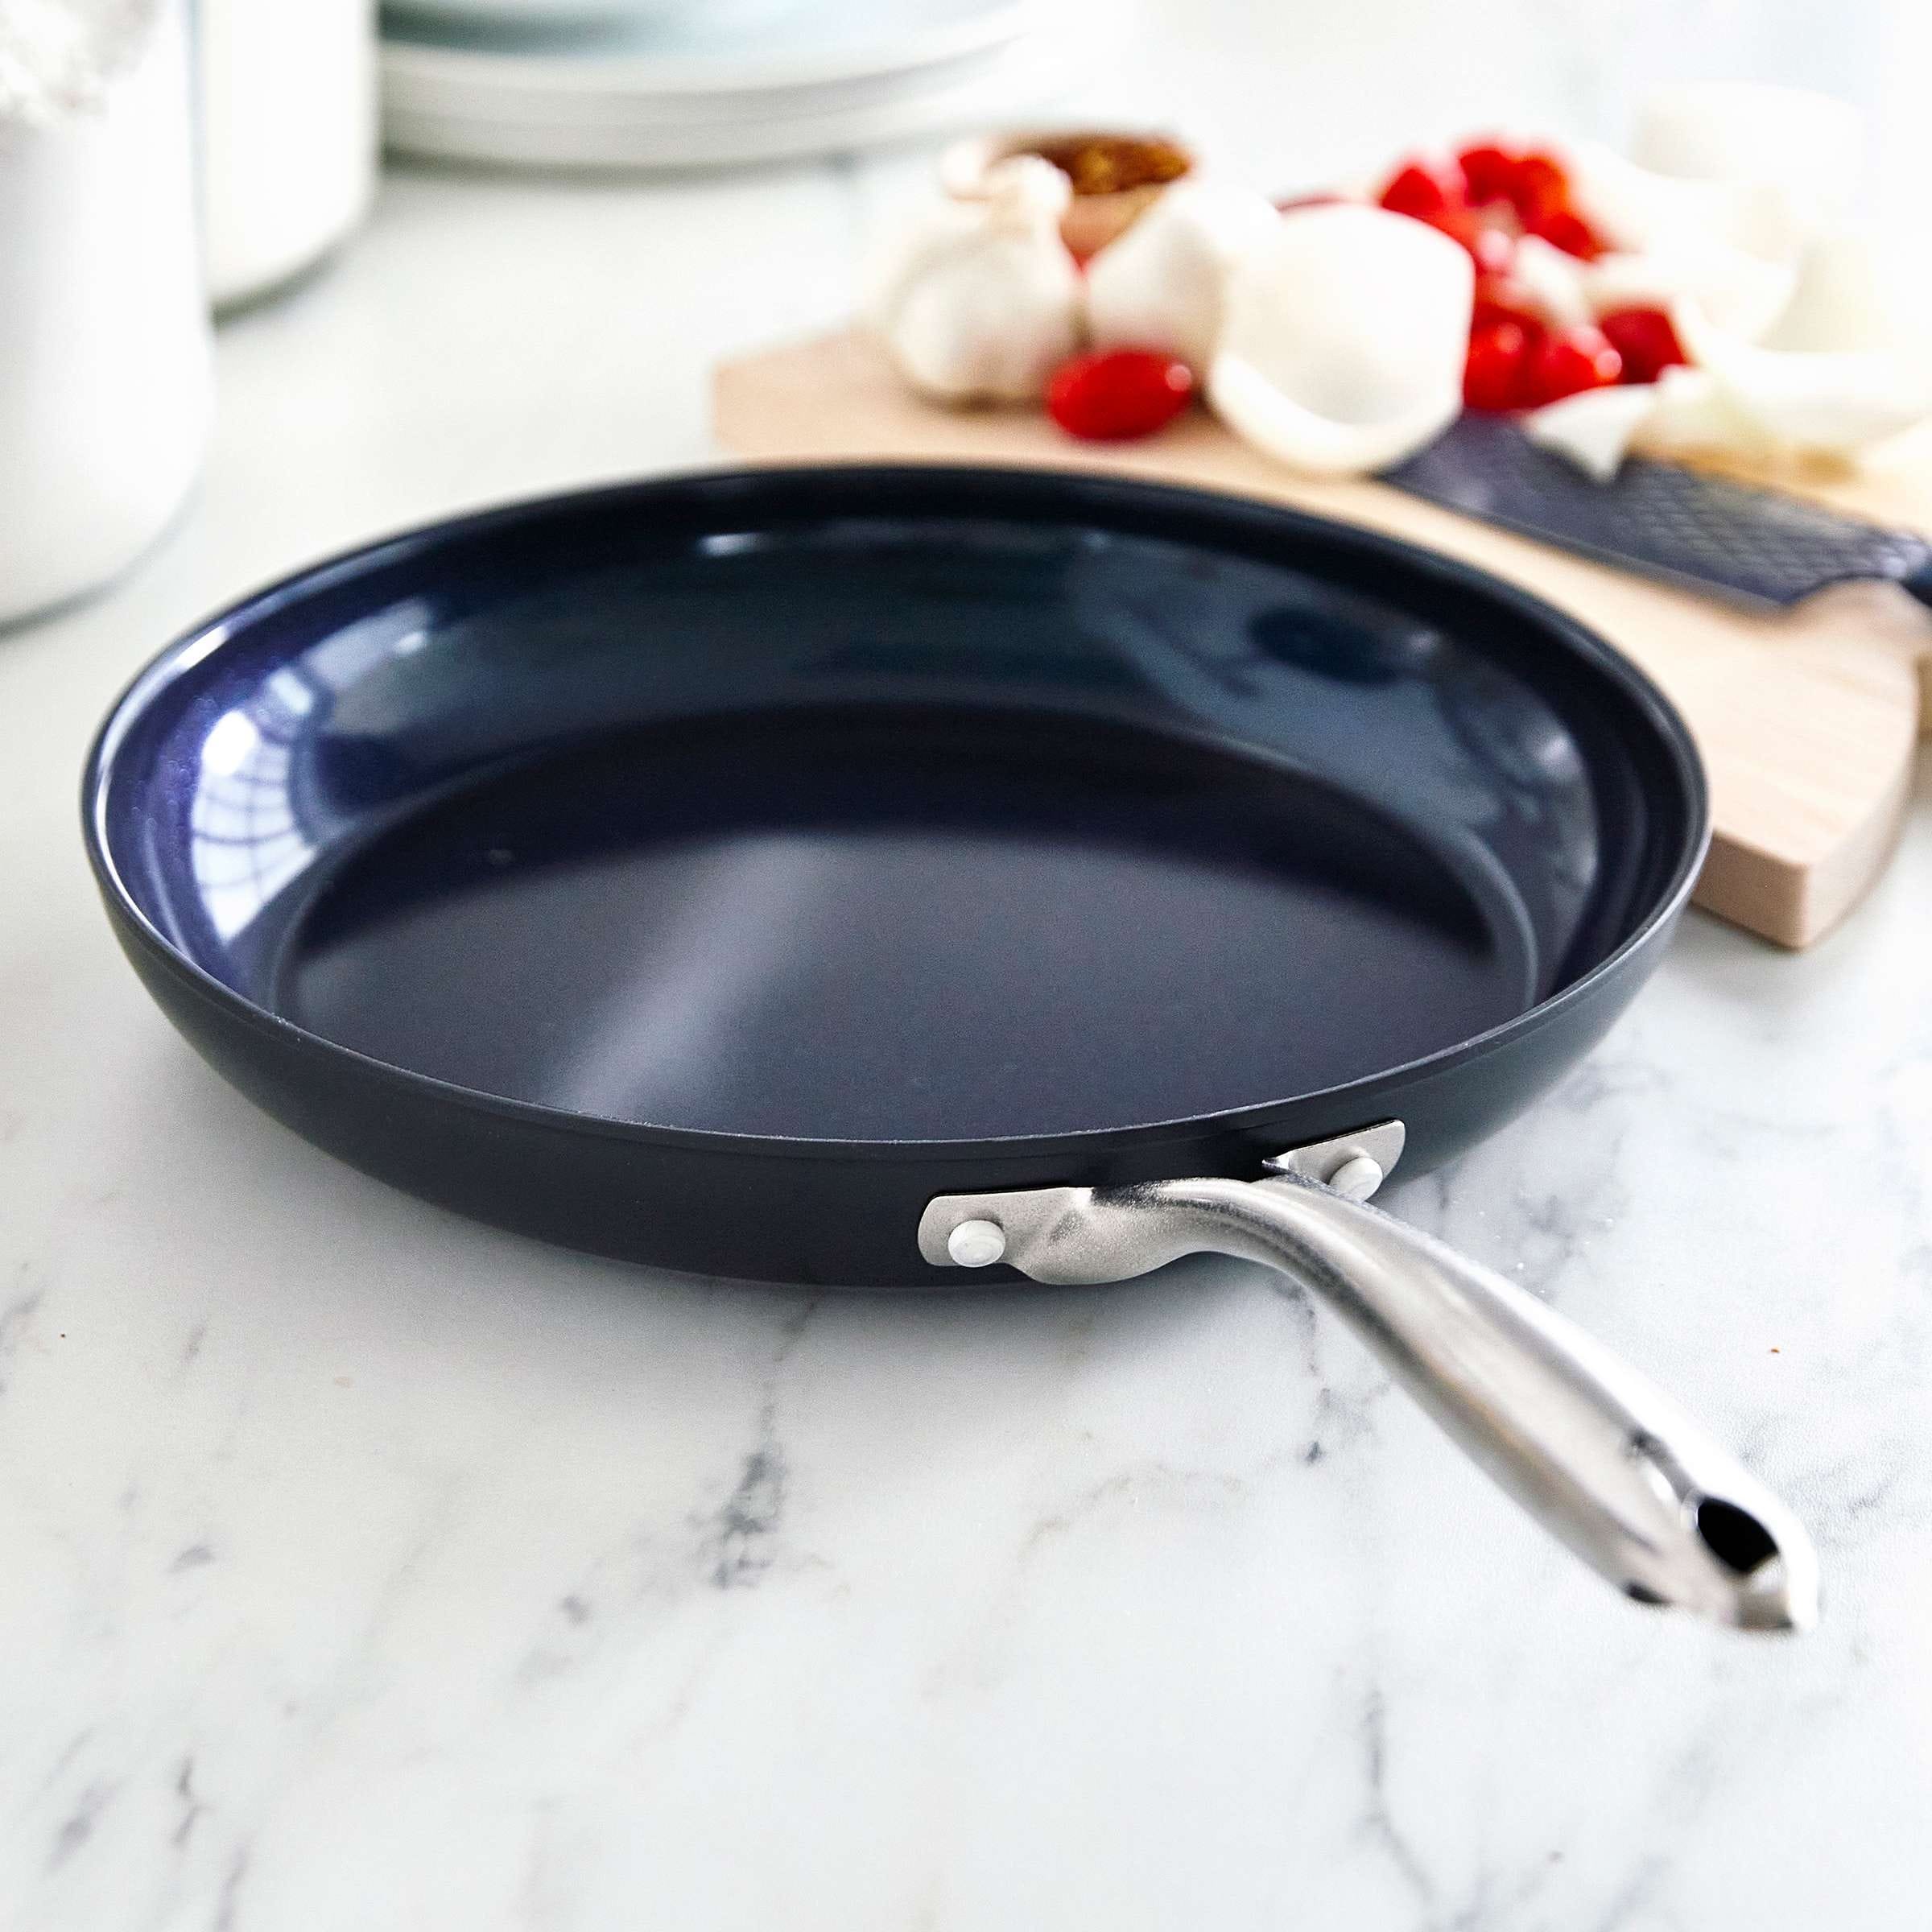 https://ak1.ostkcdn.com/images/products/is/images/direct/6cc4269dbe65be66a43999ae7529382521989a75/Blue-Diamond-Hard-Anodized-Toxin-Free-Ceramic-Nonstick-Dishwasher%2C-Oven%2C-Broiler%2C-Metal-Utensil-Safe-Frying-Pan%2C-10%22.jpg